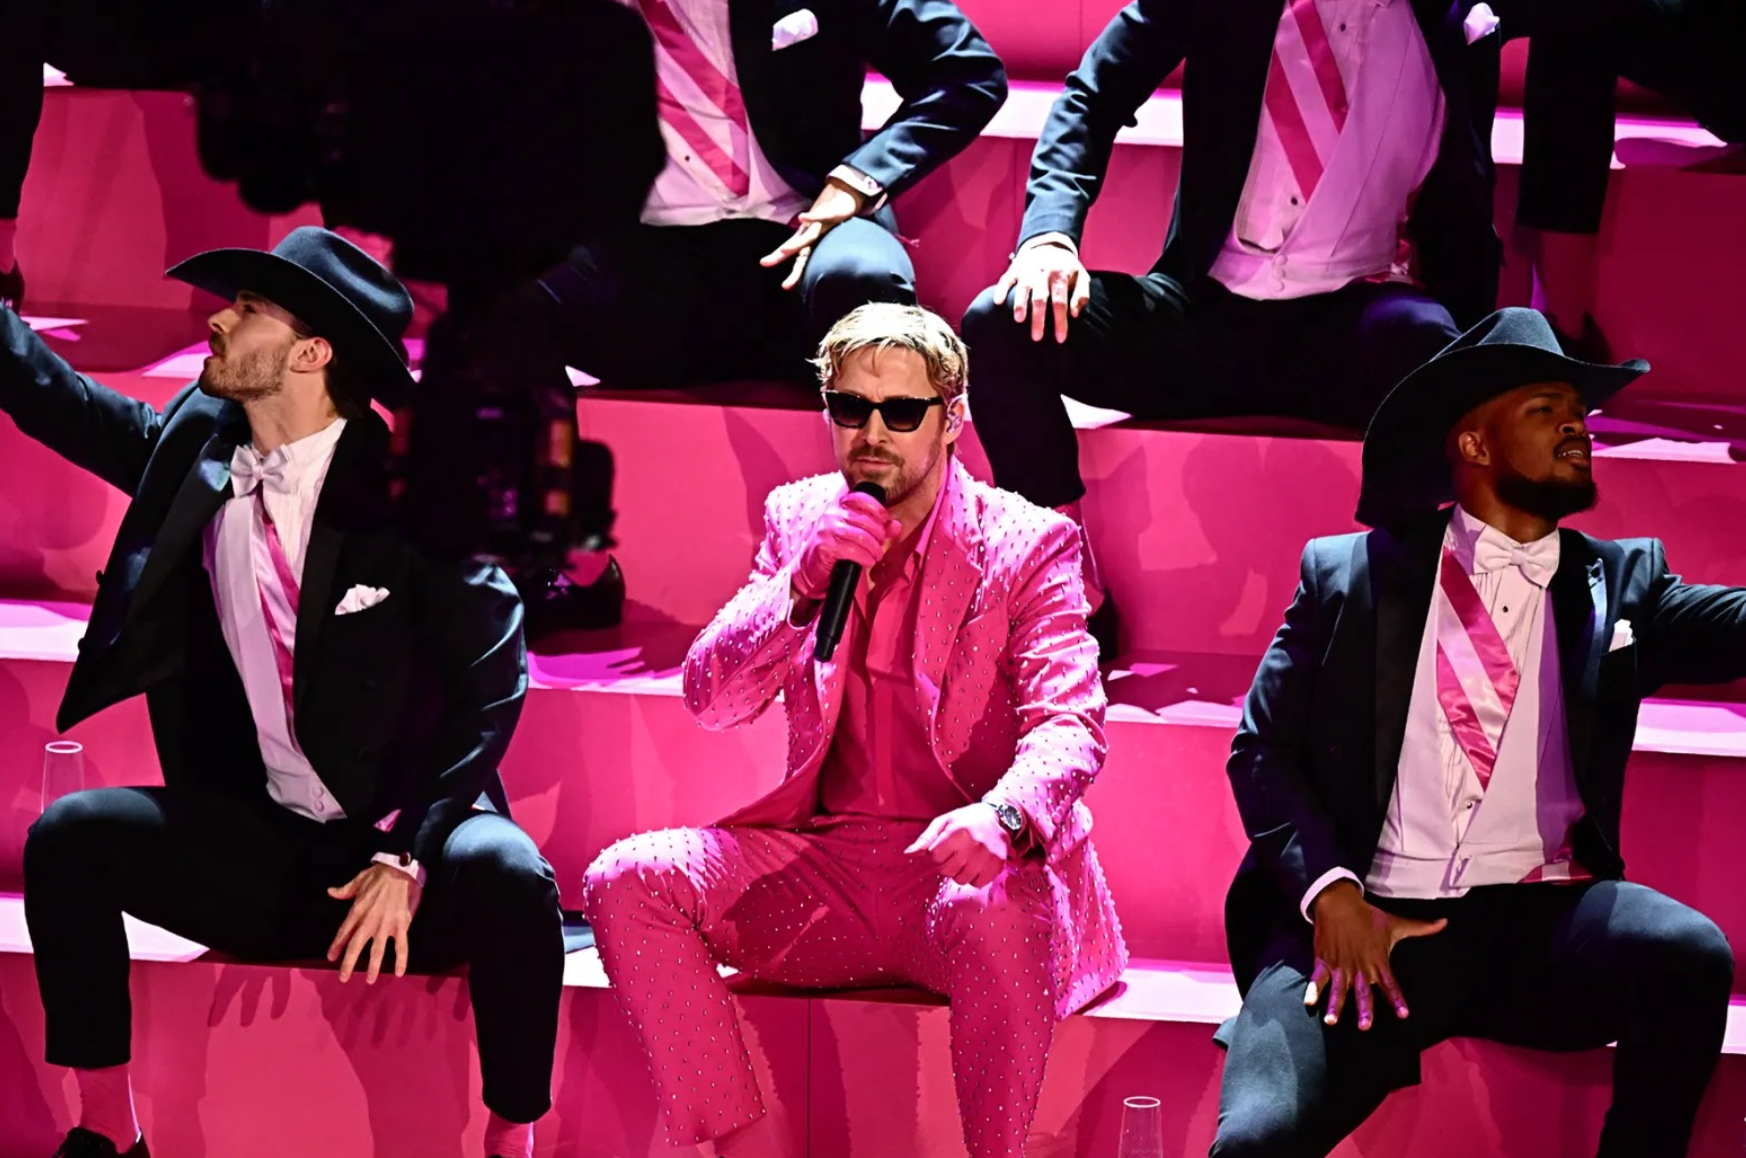 How Ryan Gosling’s Performance of “I’m Just Ken” gave The Barbie Movie the Finale it Deserved